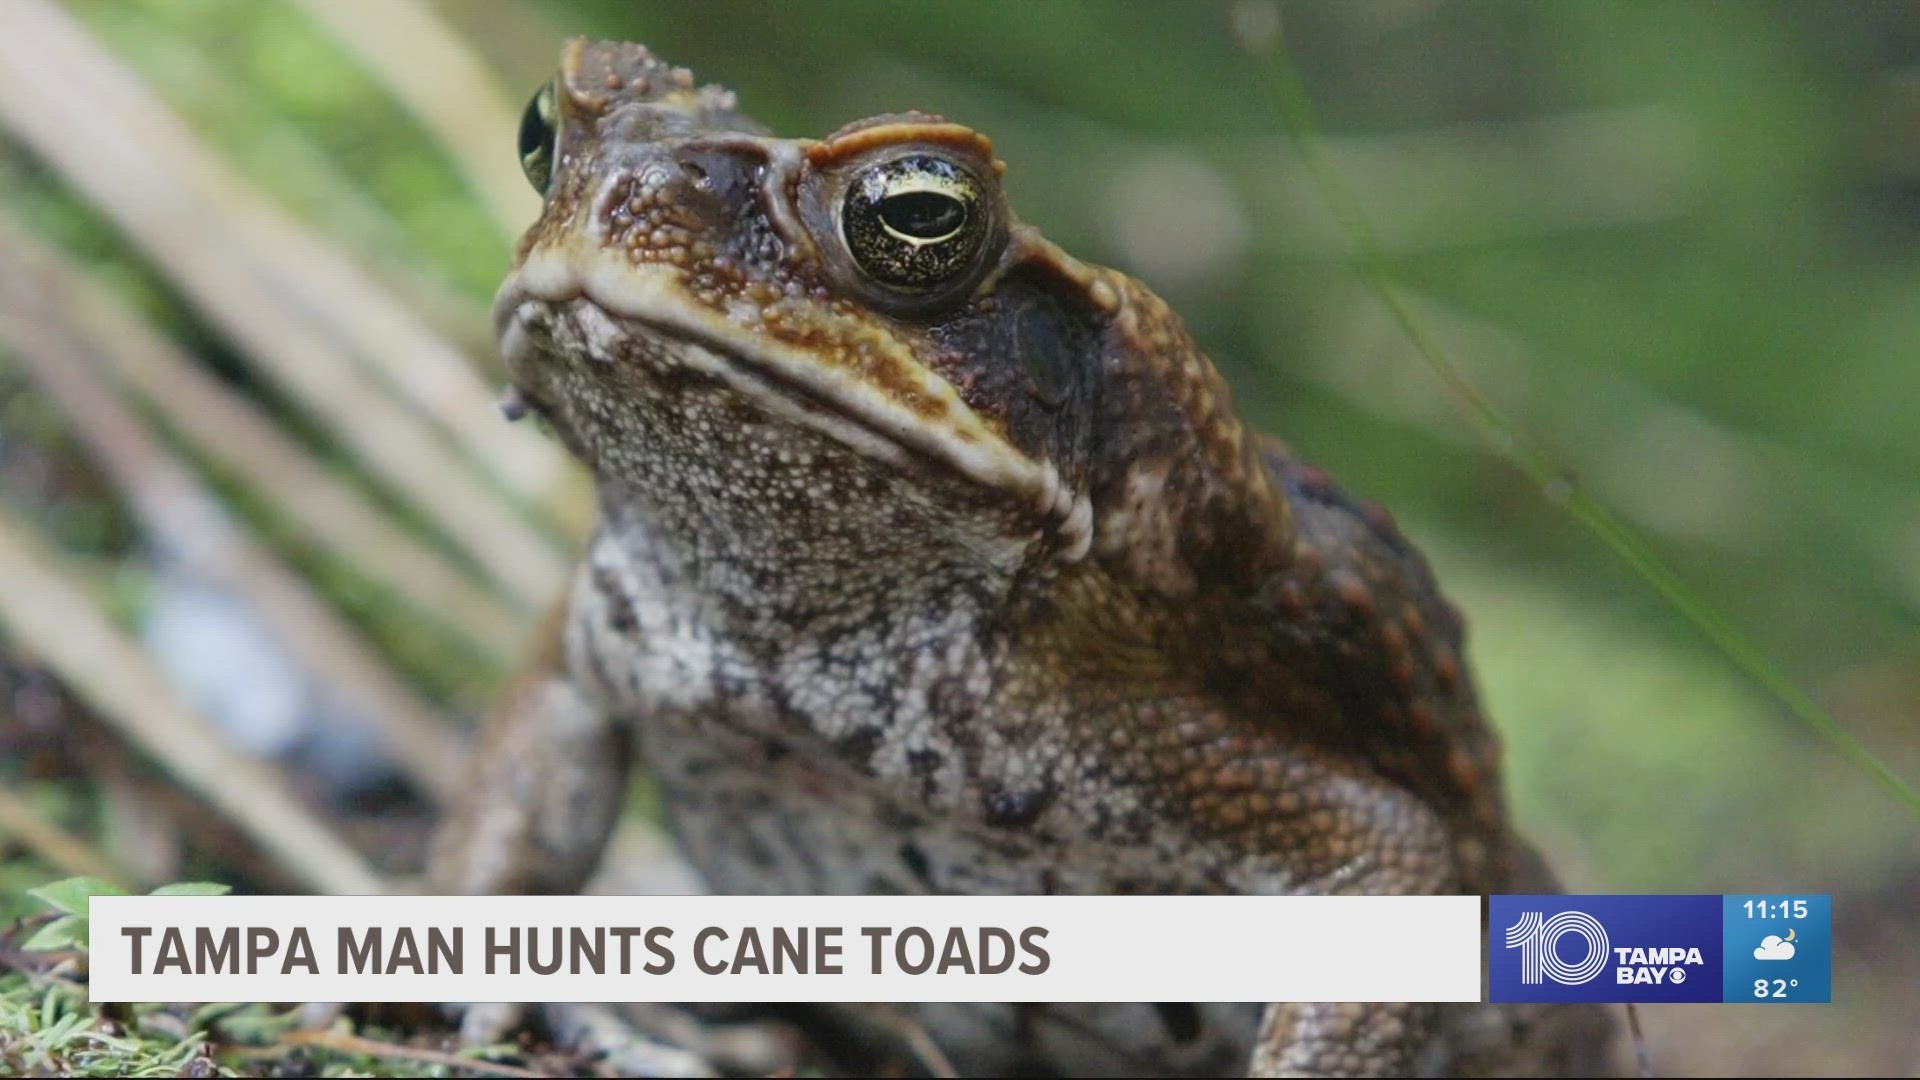 Armed with a BB gun, one man has made it his mission to wipe out the cane toad population in a Lutz community.